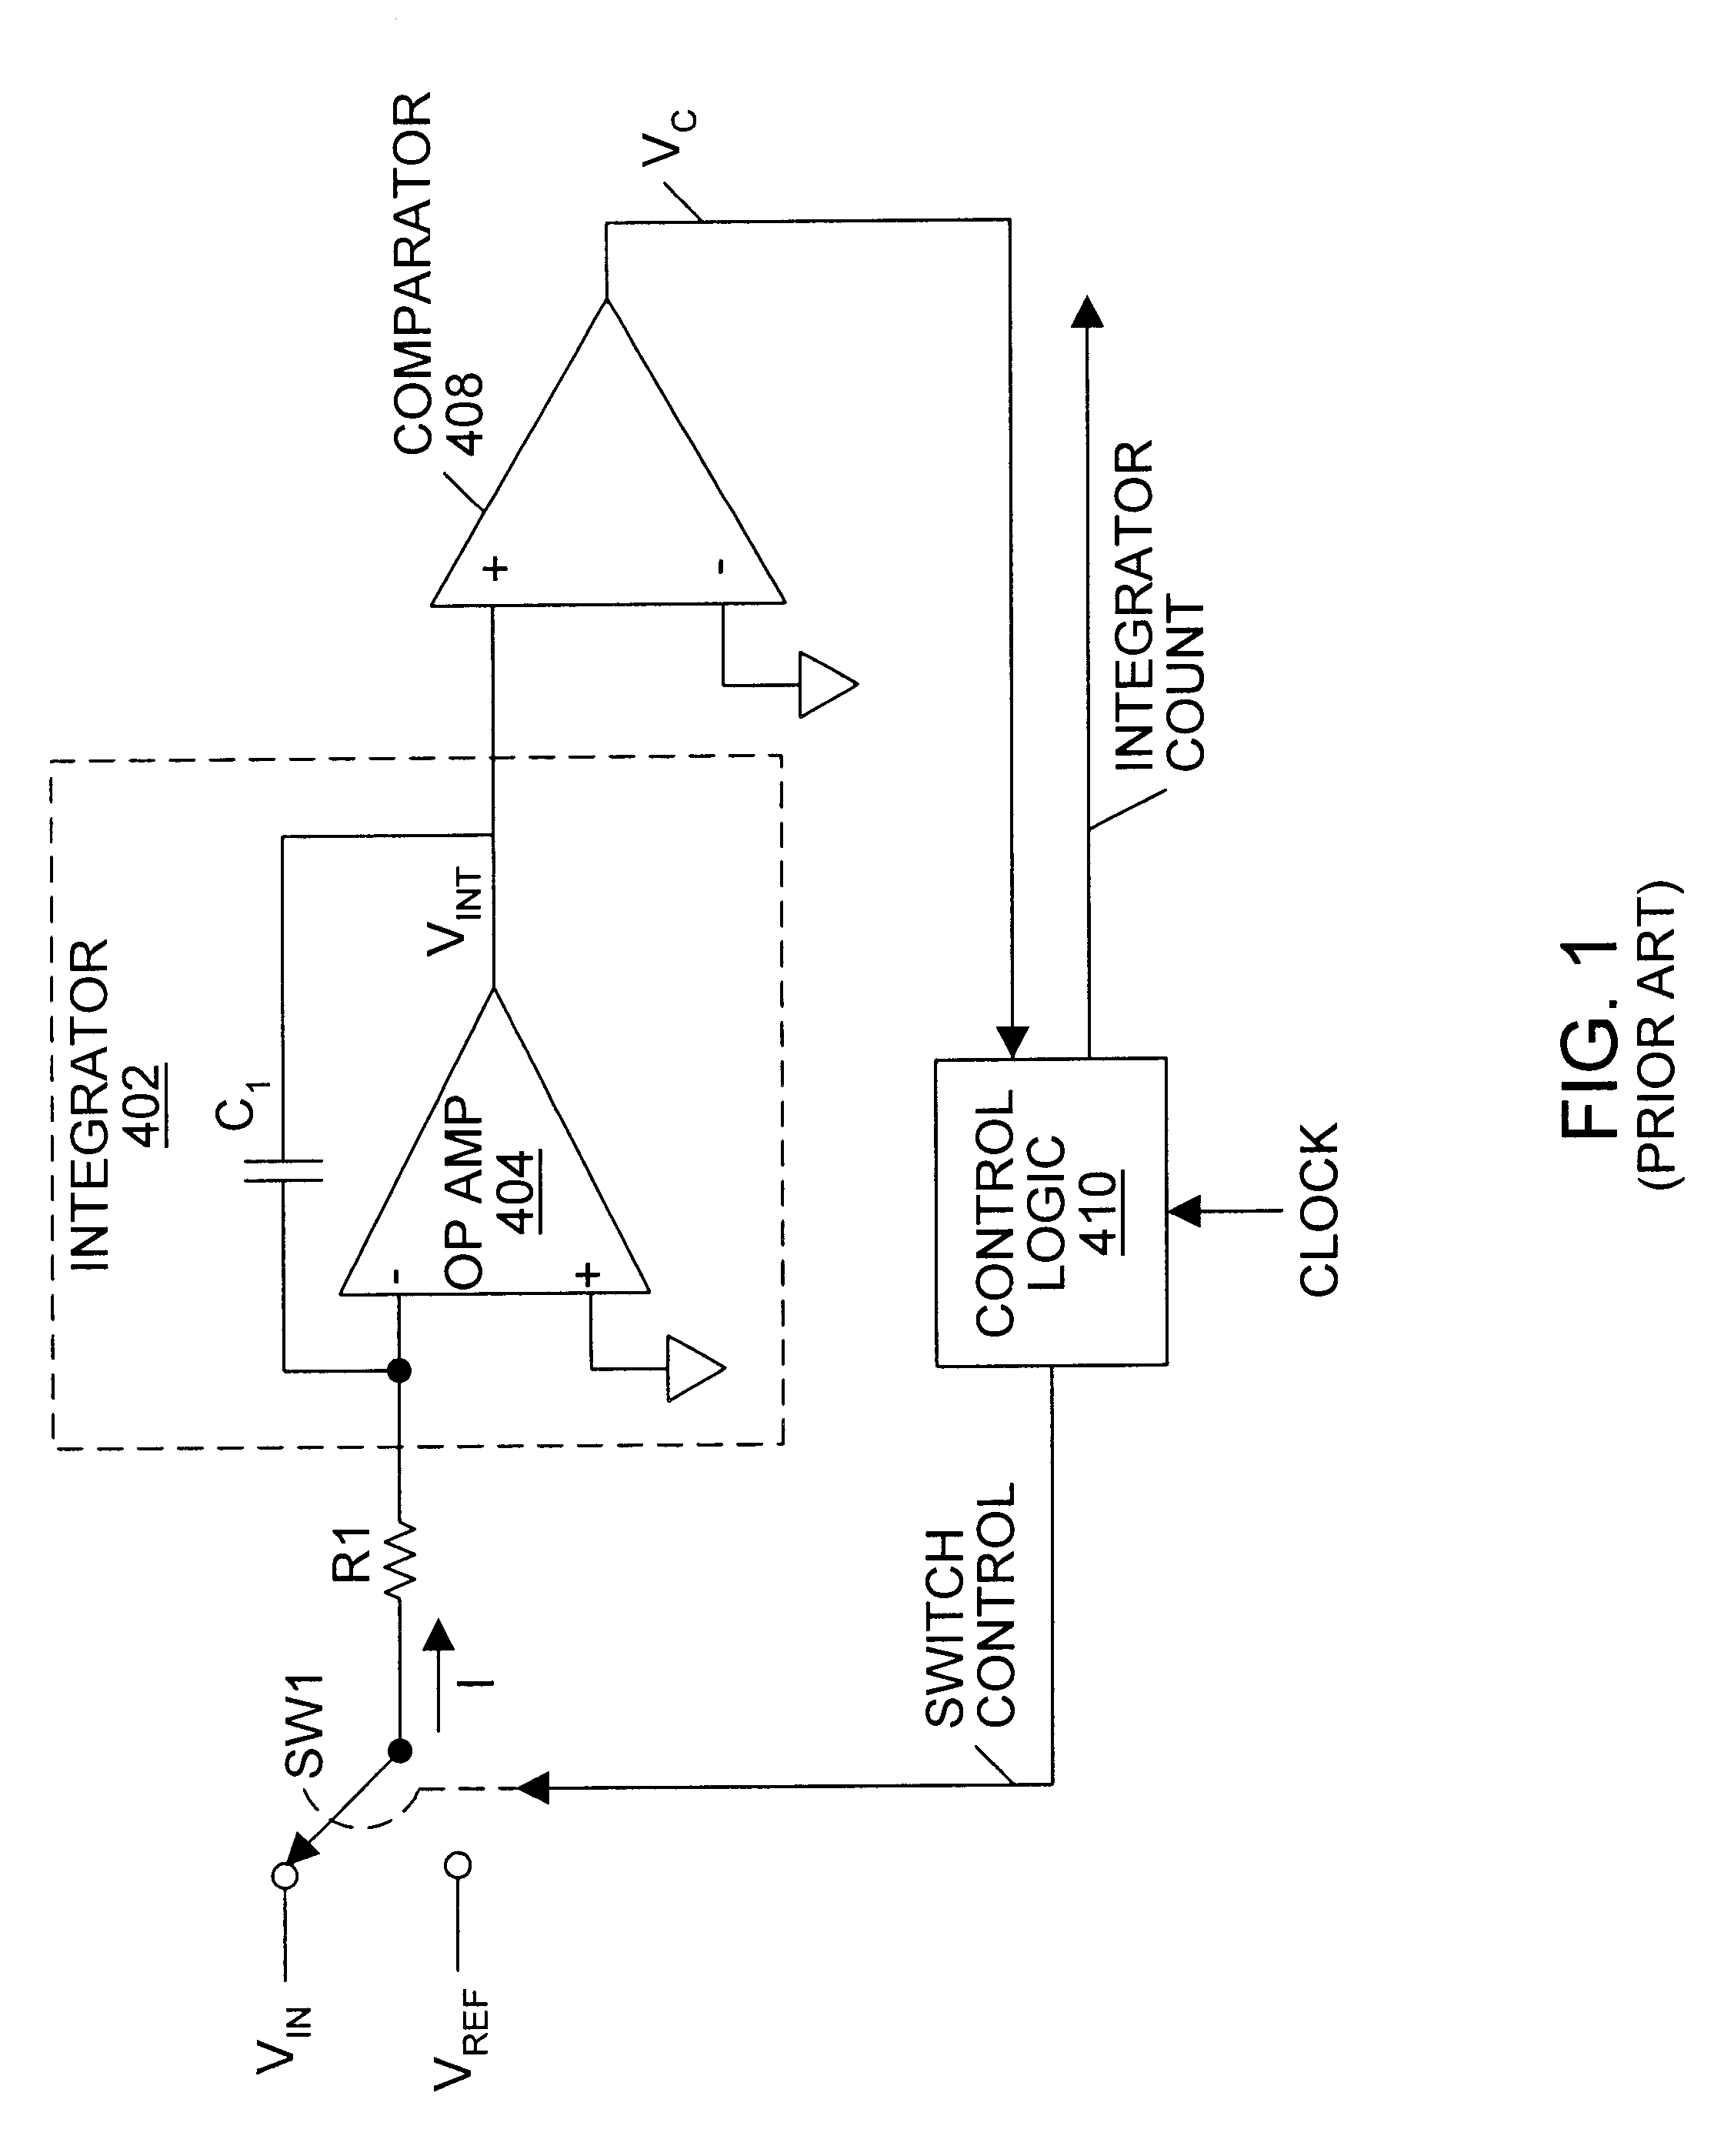 Integrating analog to digital converter with improved resolution